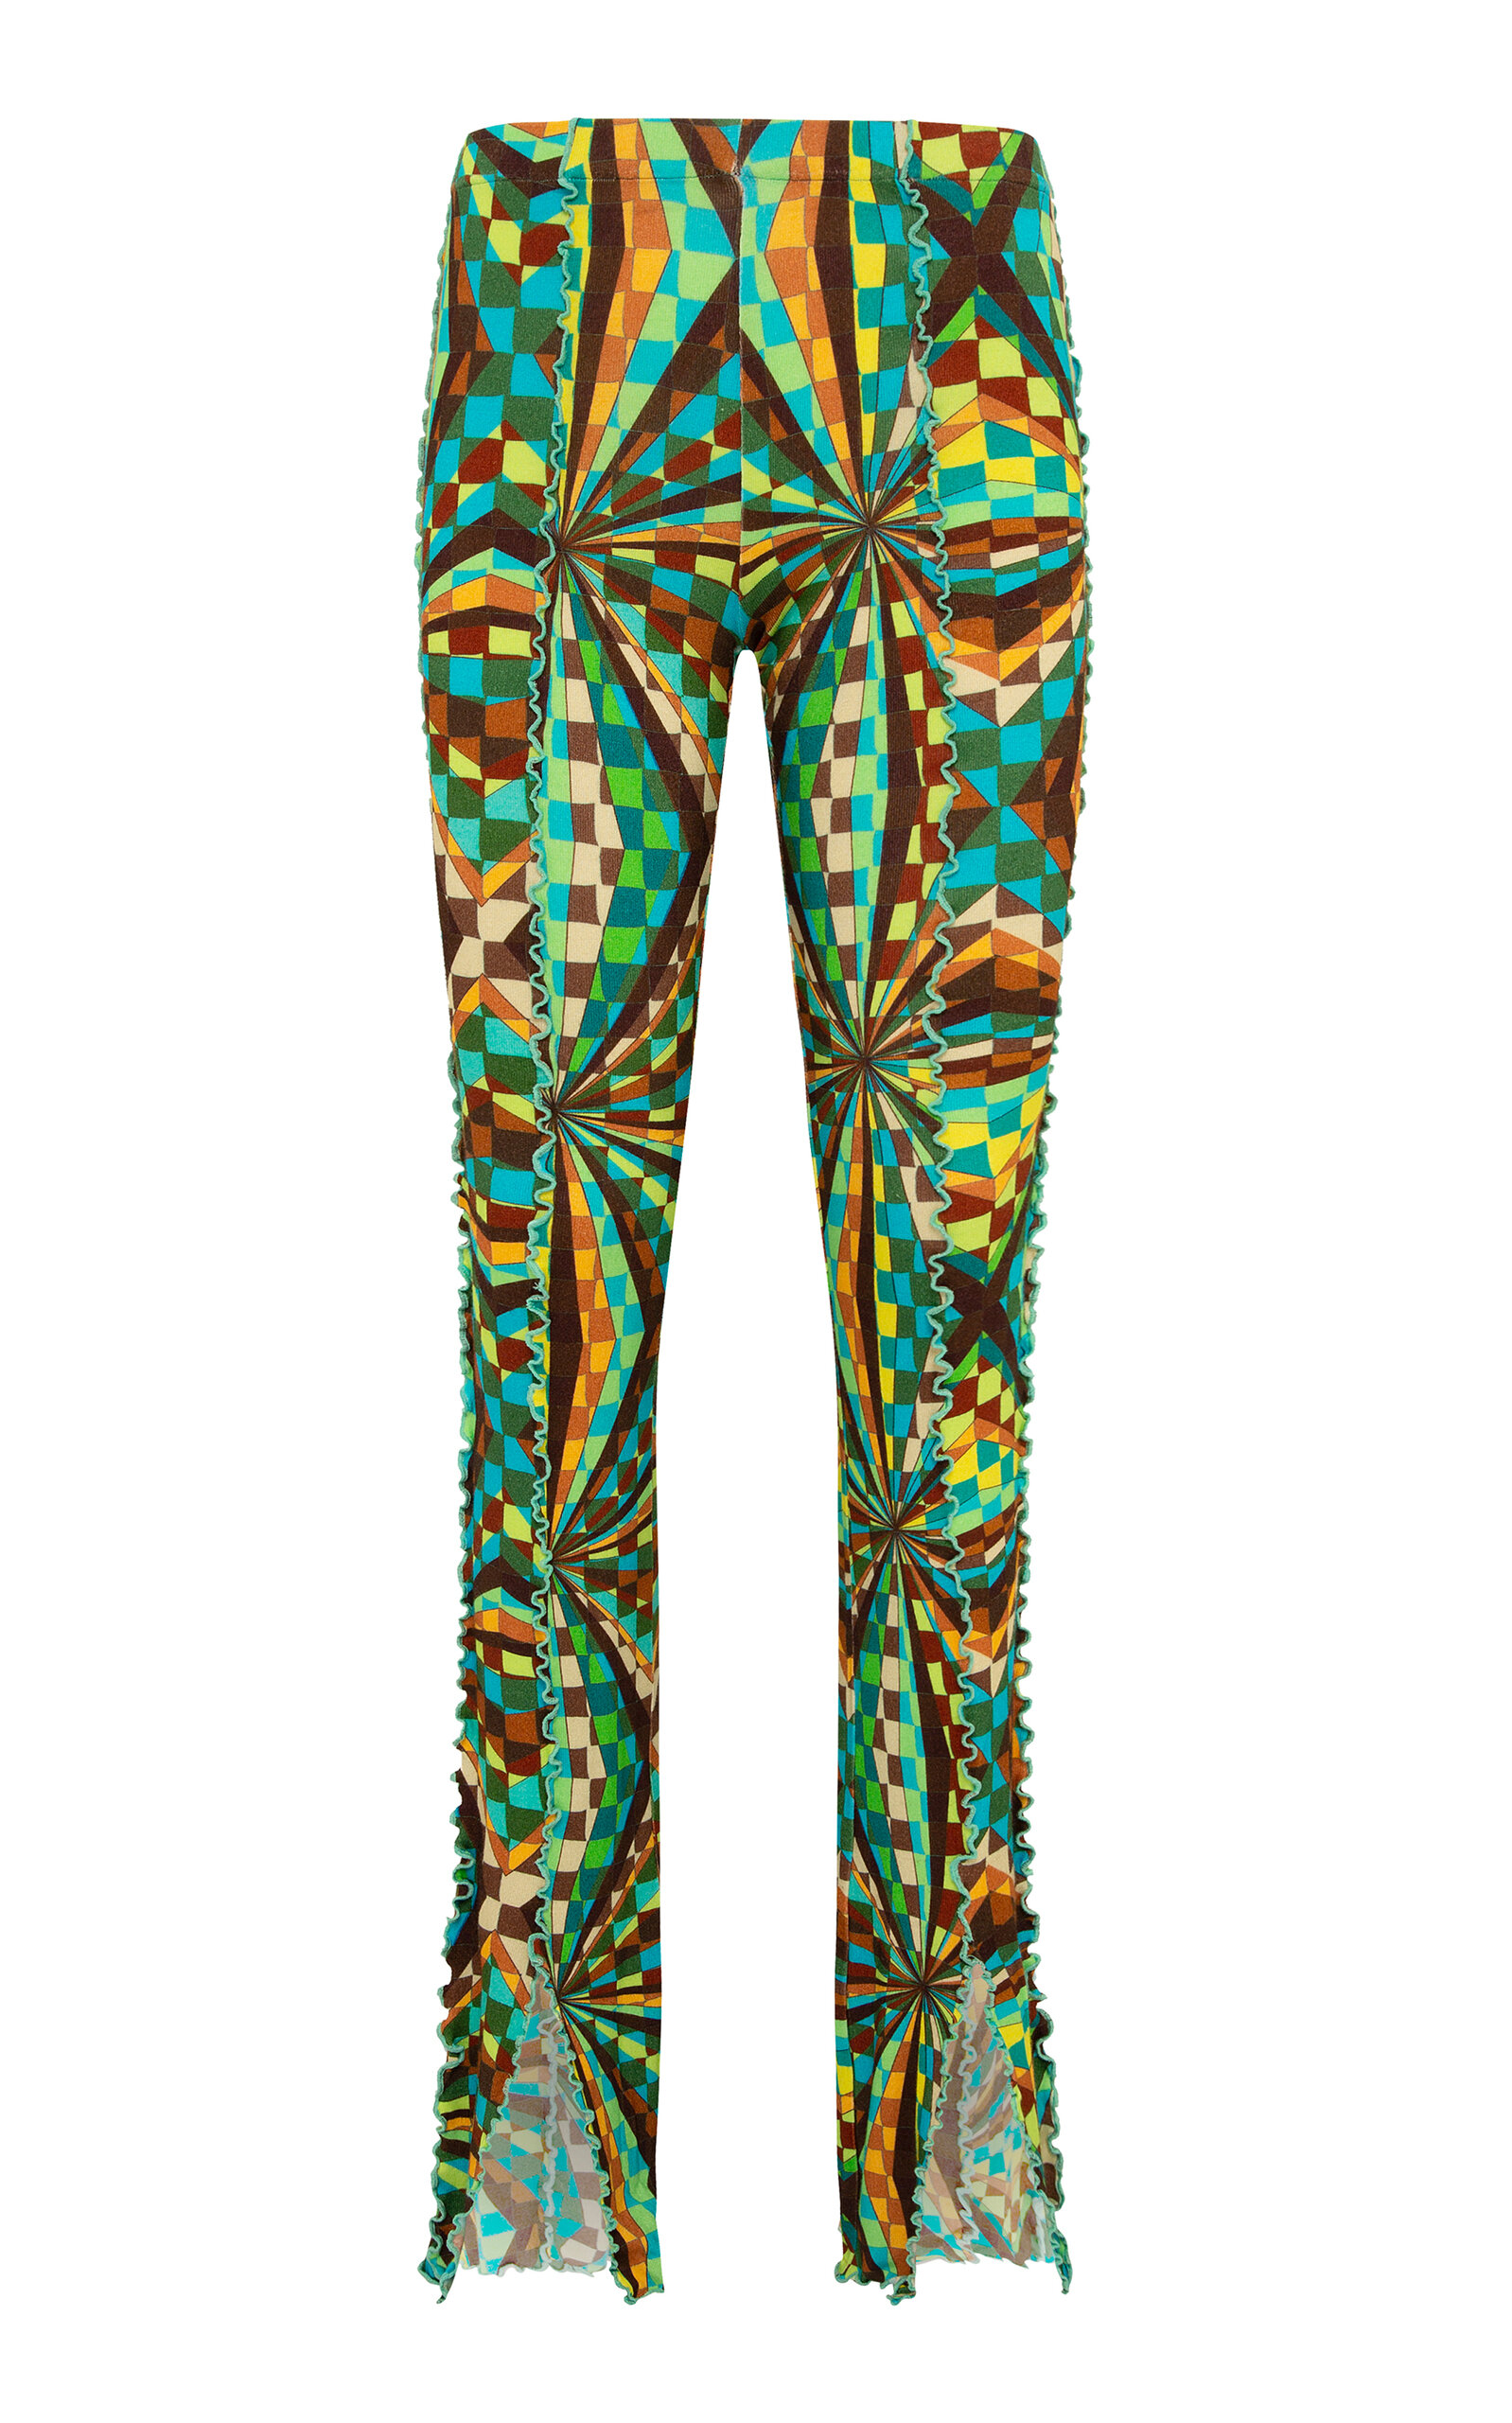 Siedres Mult Kaleidoscope Printed Knit Pants W/ Contrast Stitching In Multi